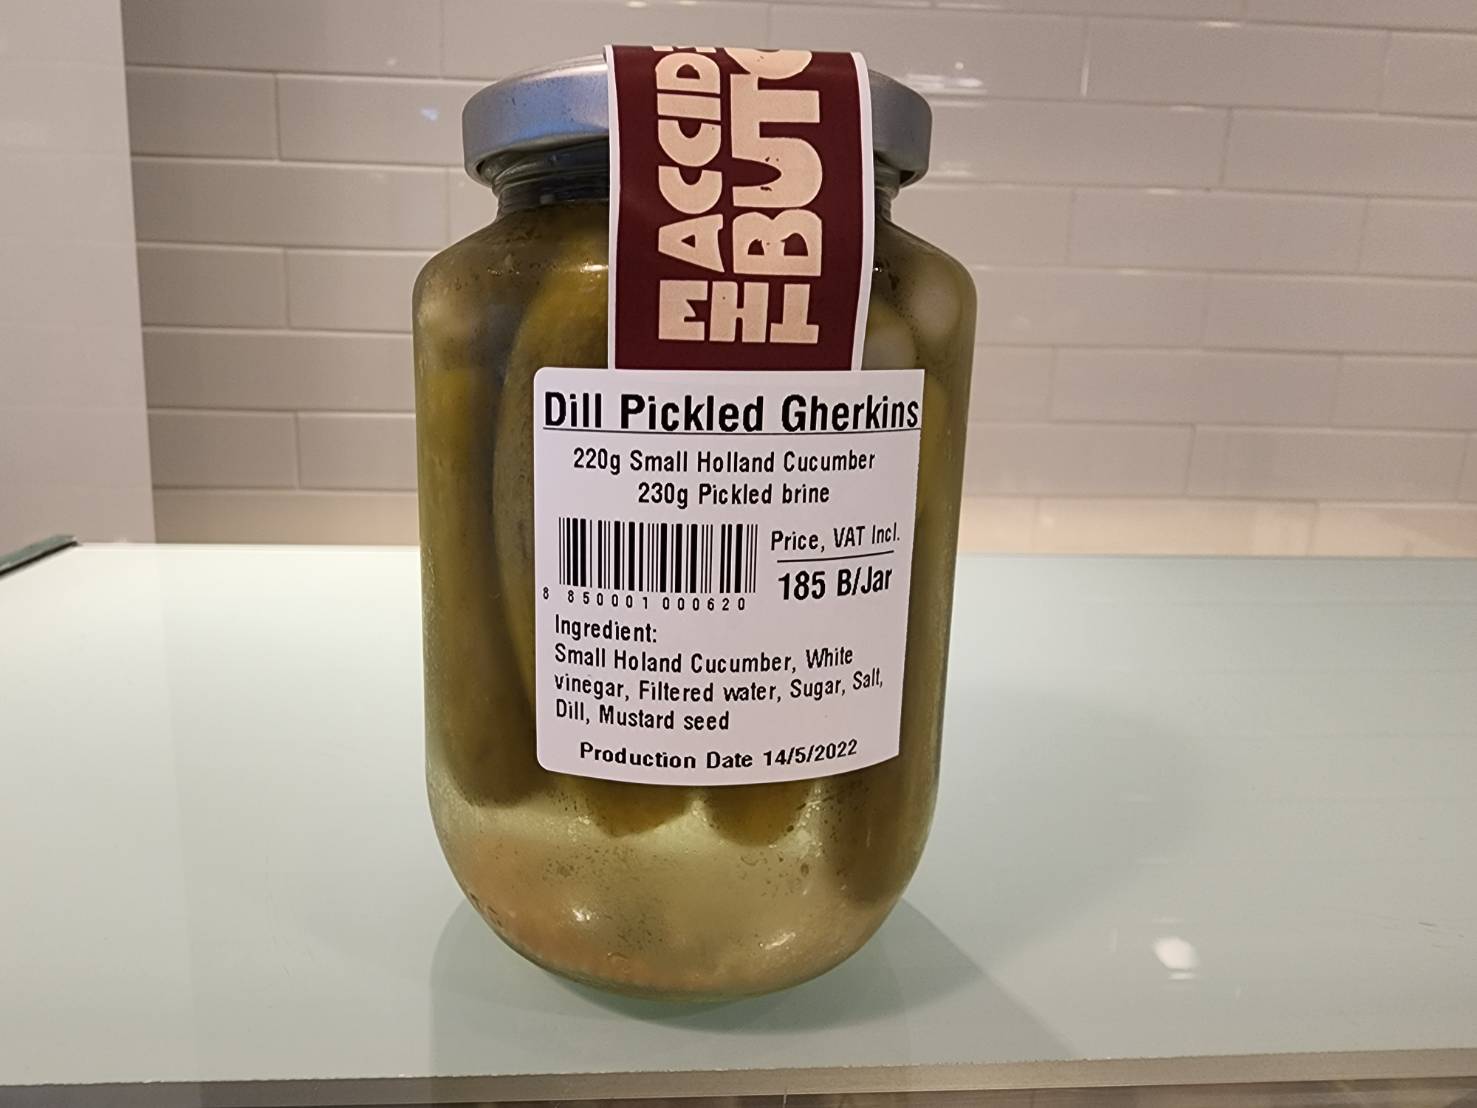 Dill Pickled Gherkins